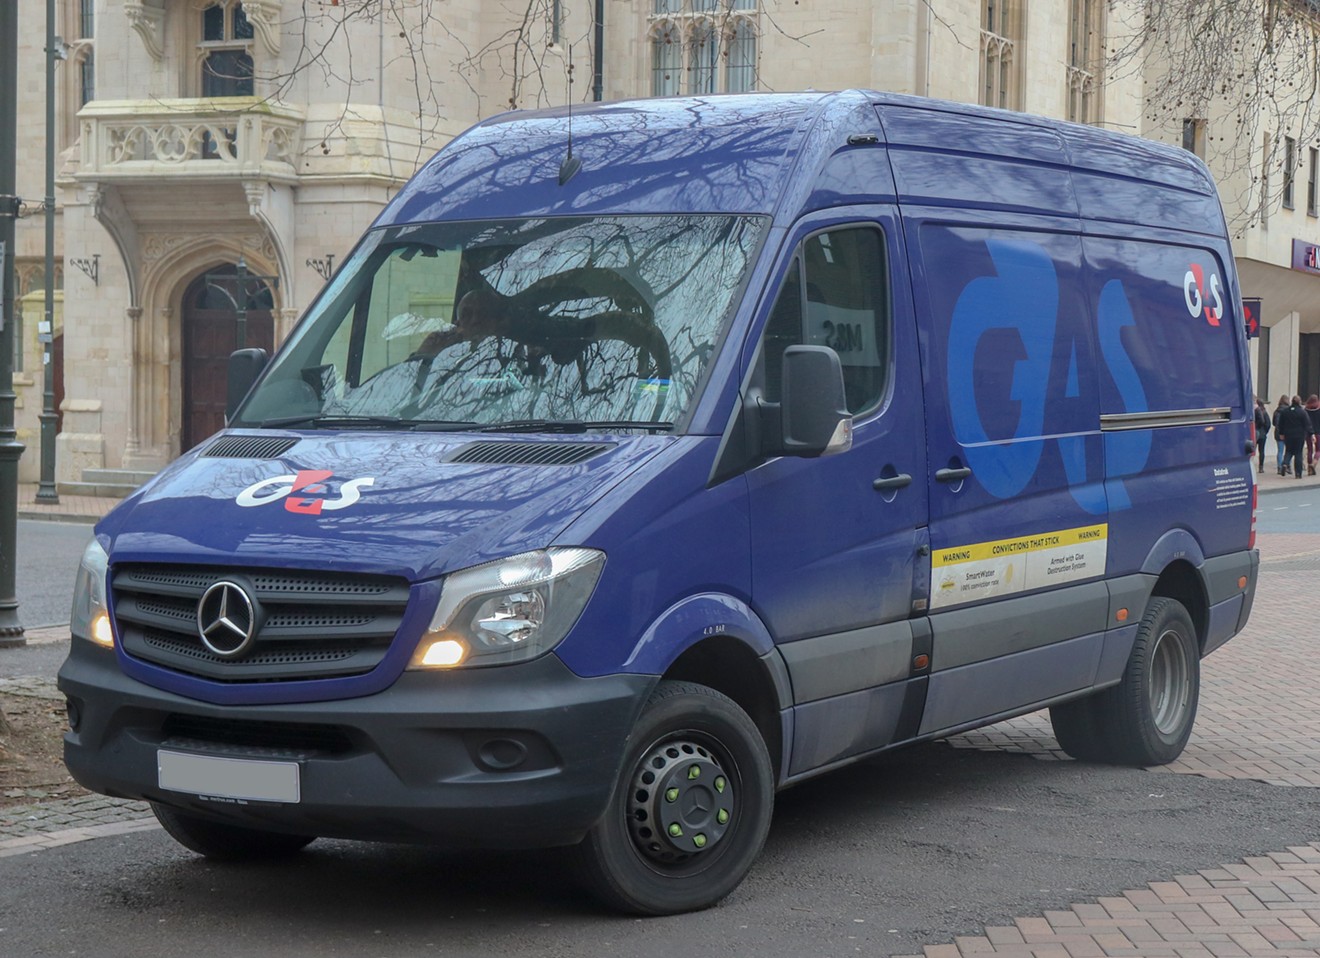 A G4S Secure Solutions van in the United Kingdom.